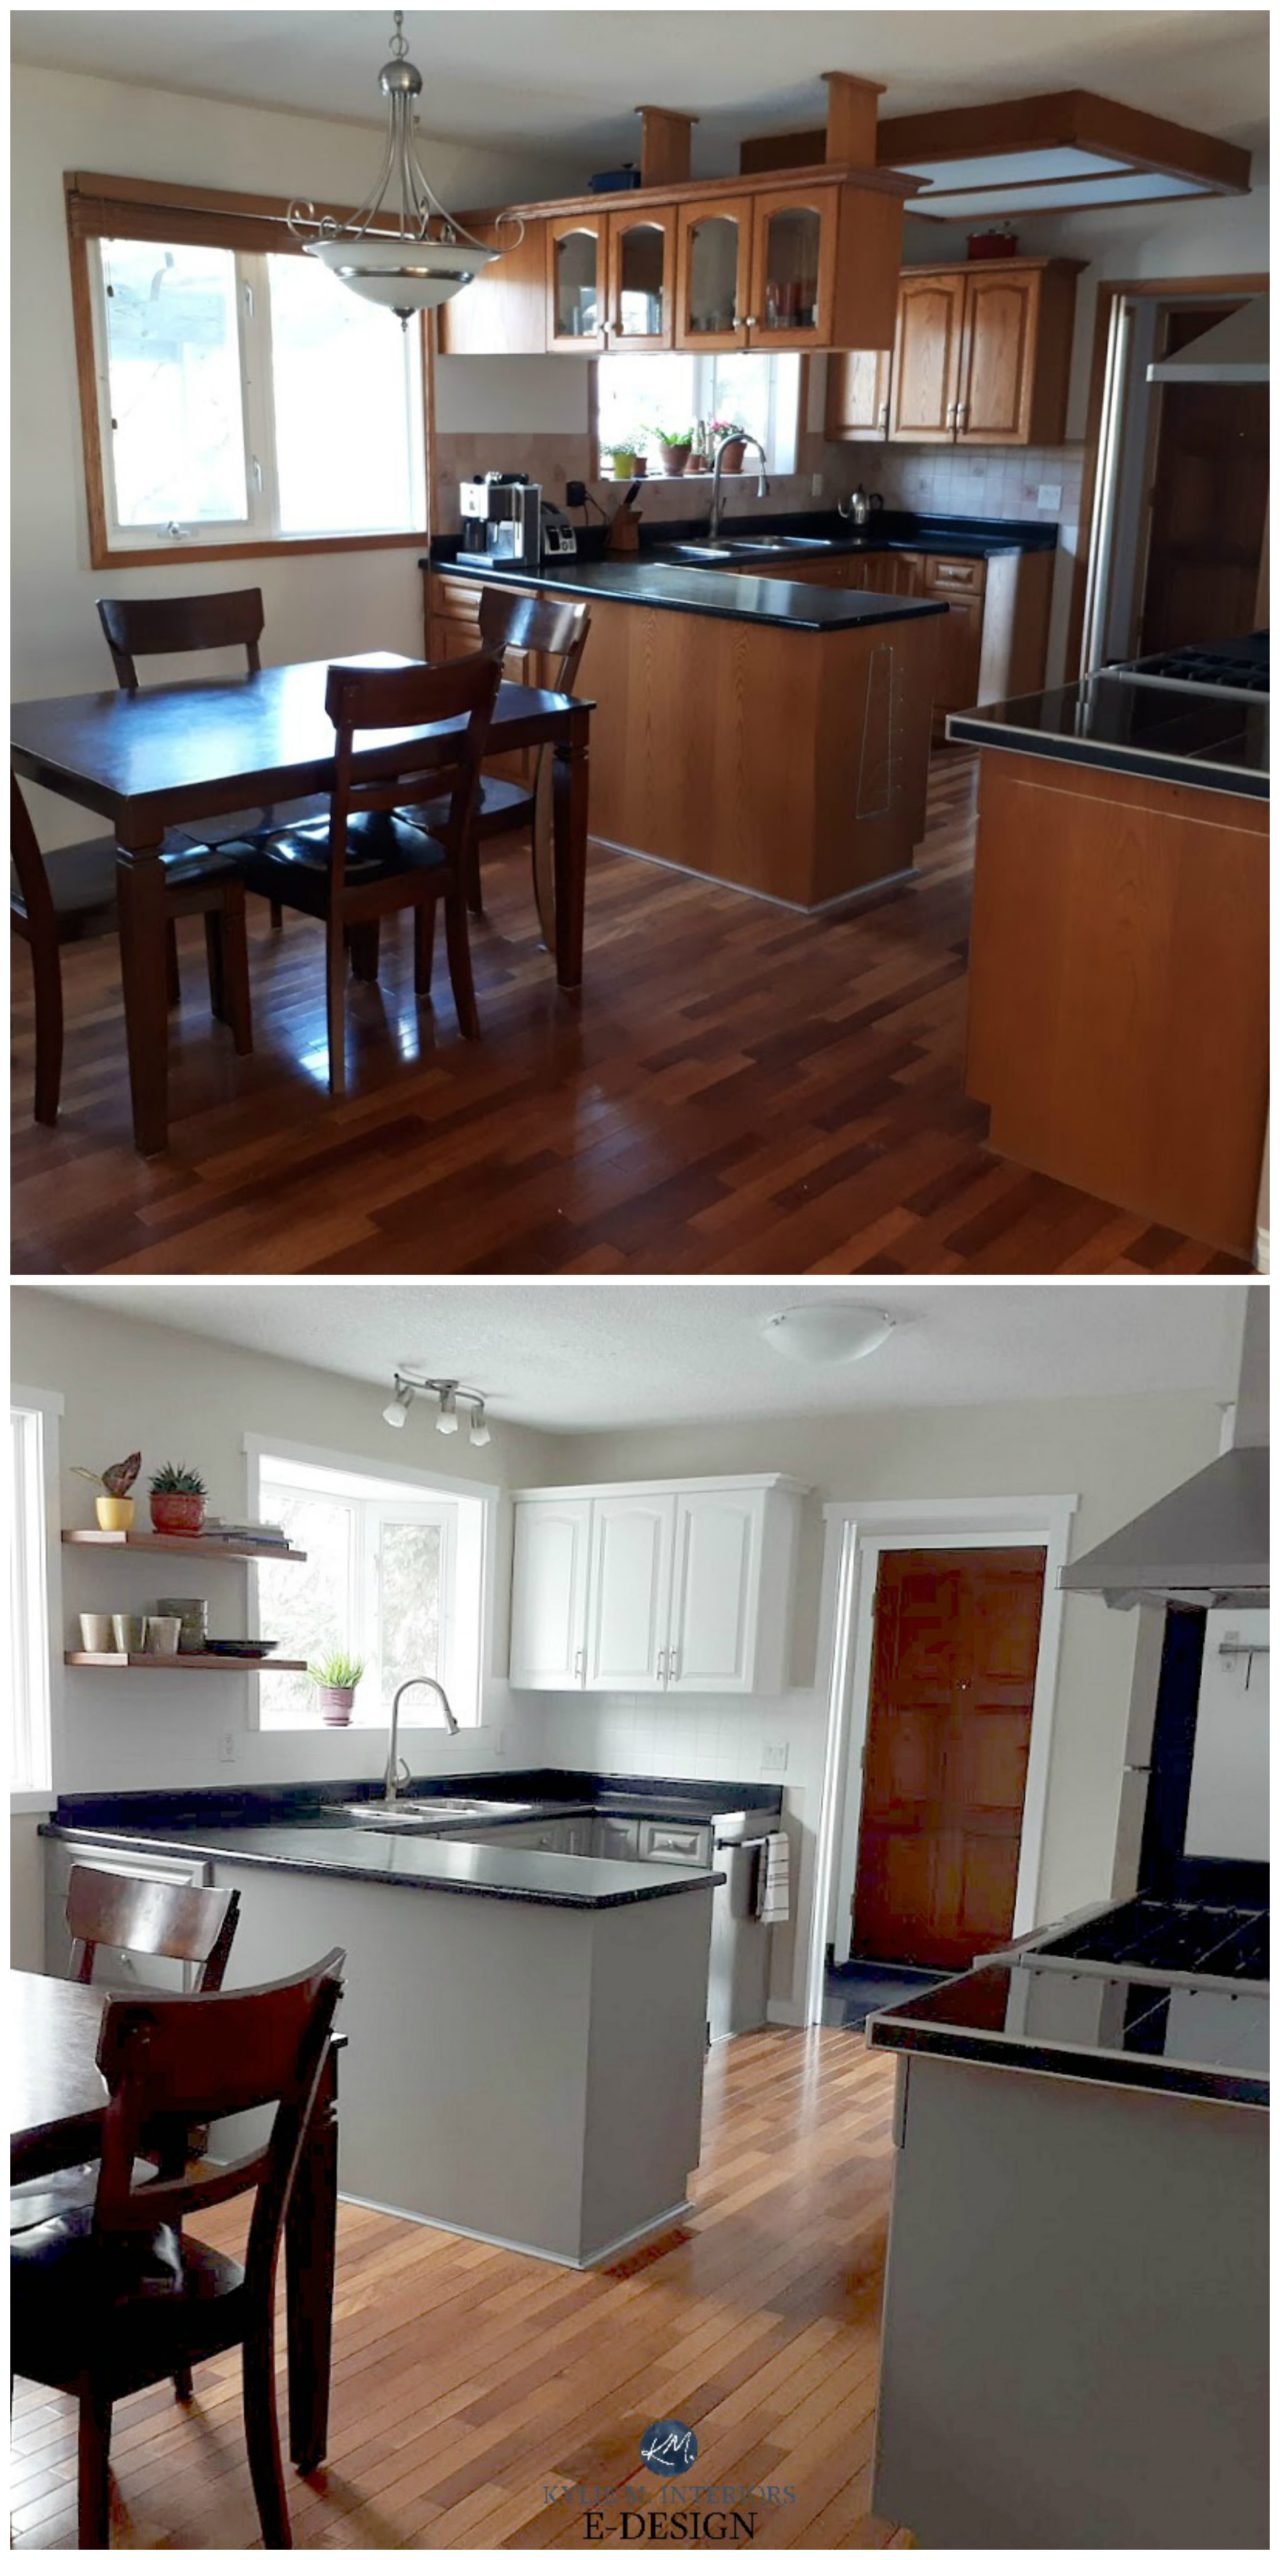 Before and after, budget friendly kitchen update ideas. Painted oak